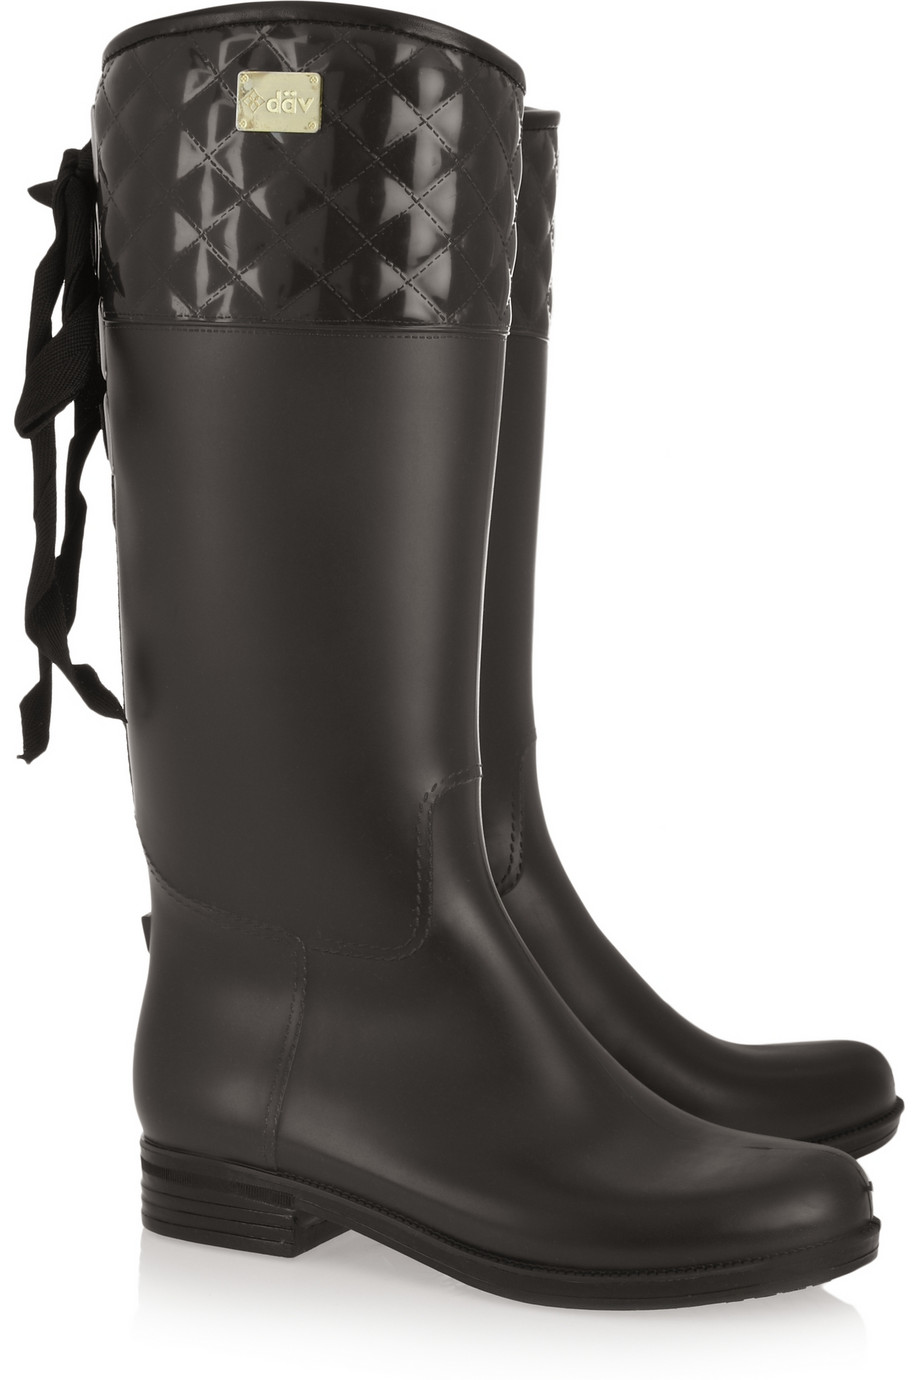 Dav Eve Quilted Pvc Rain Boots in Black (Brown) | Lyst